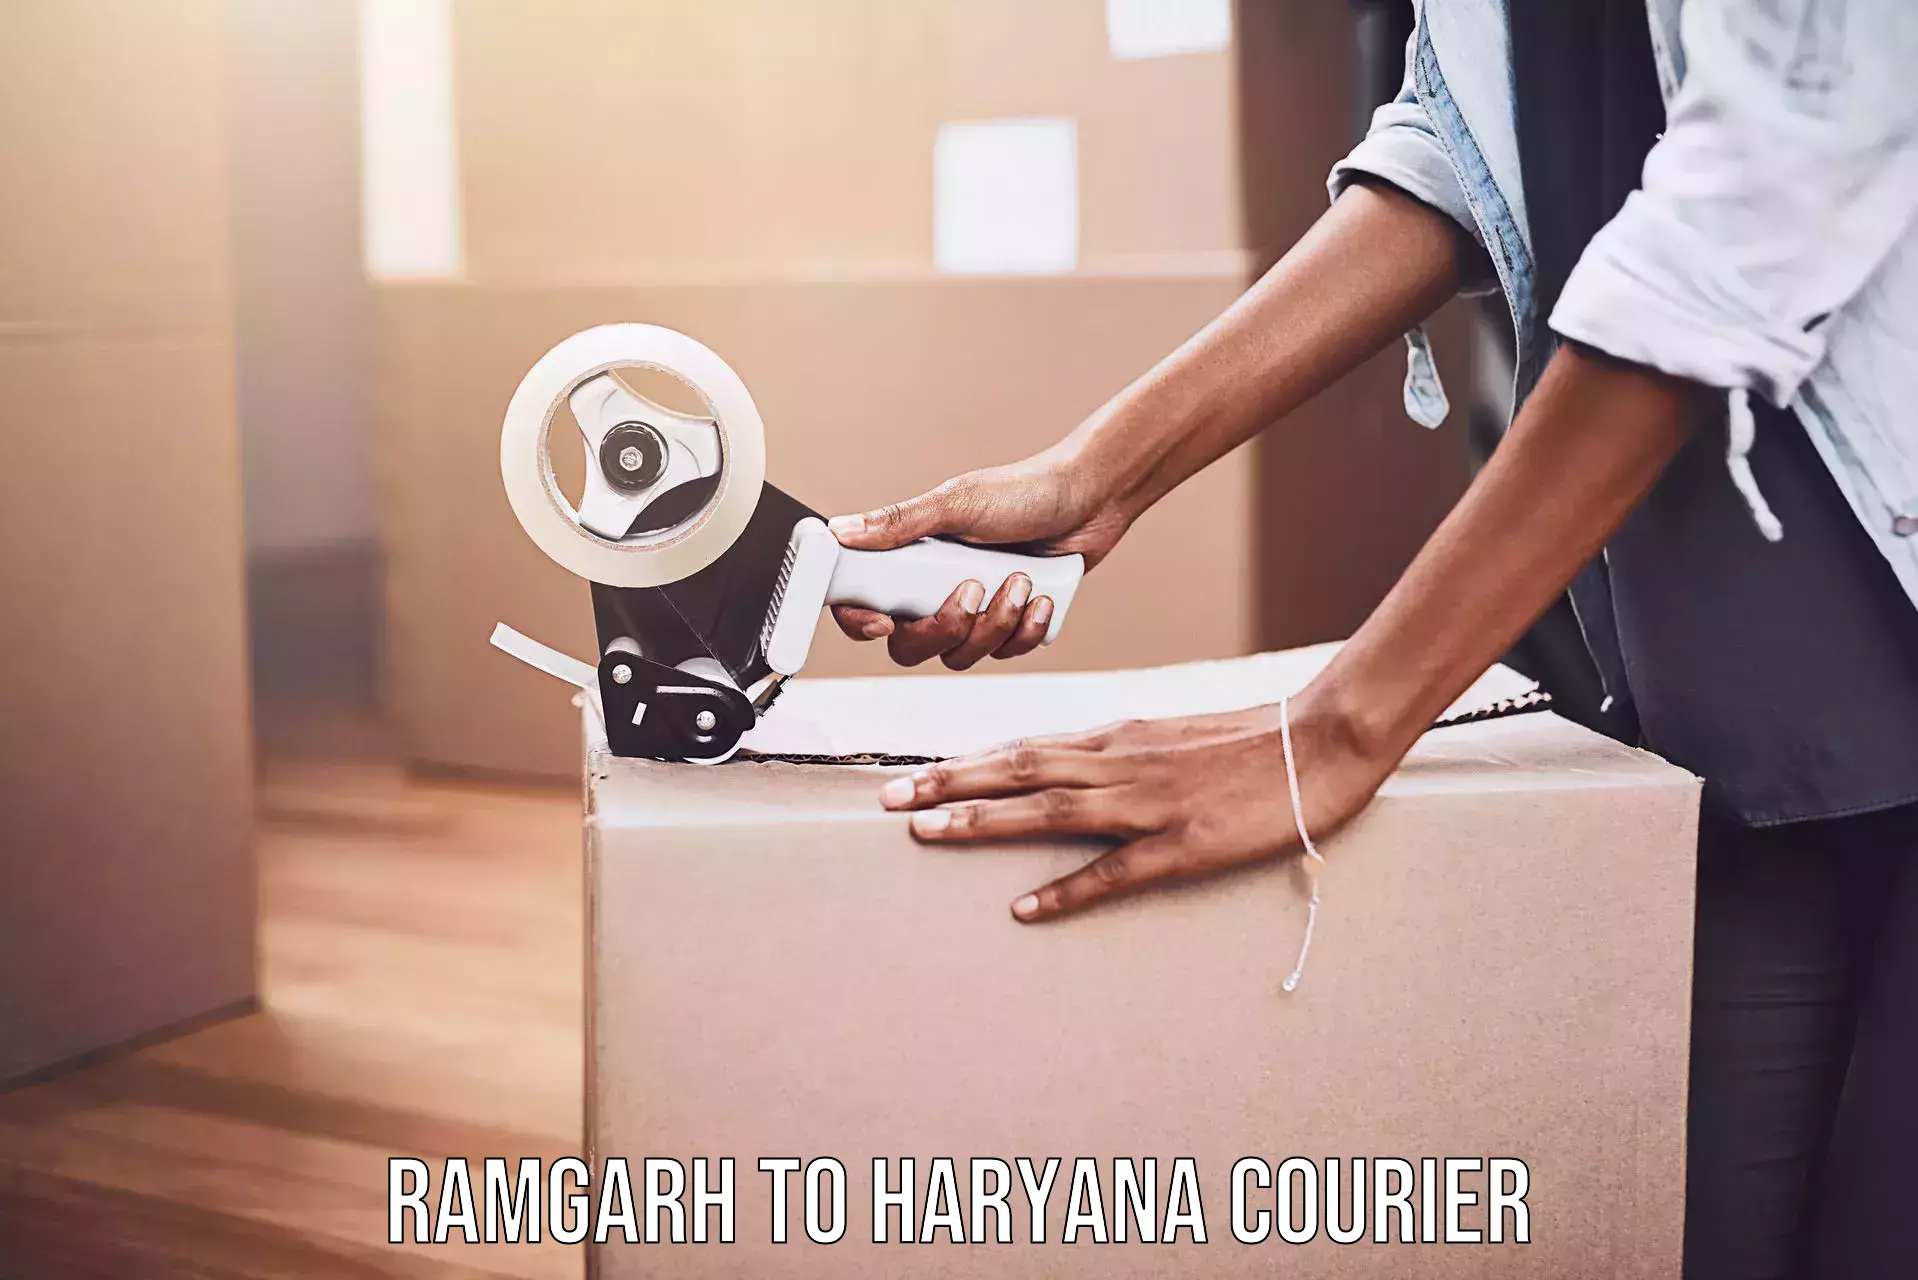 User-friendly courier app Ramgarh to Hansi